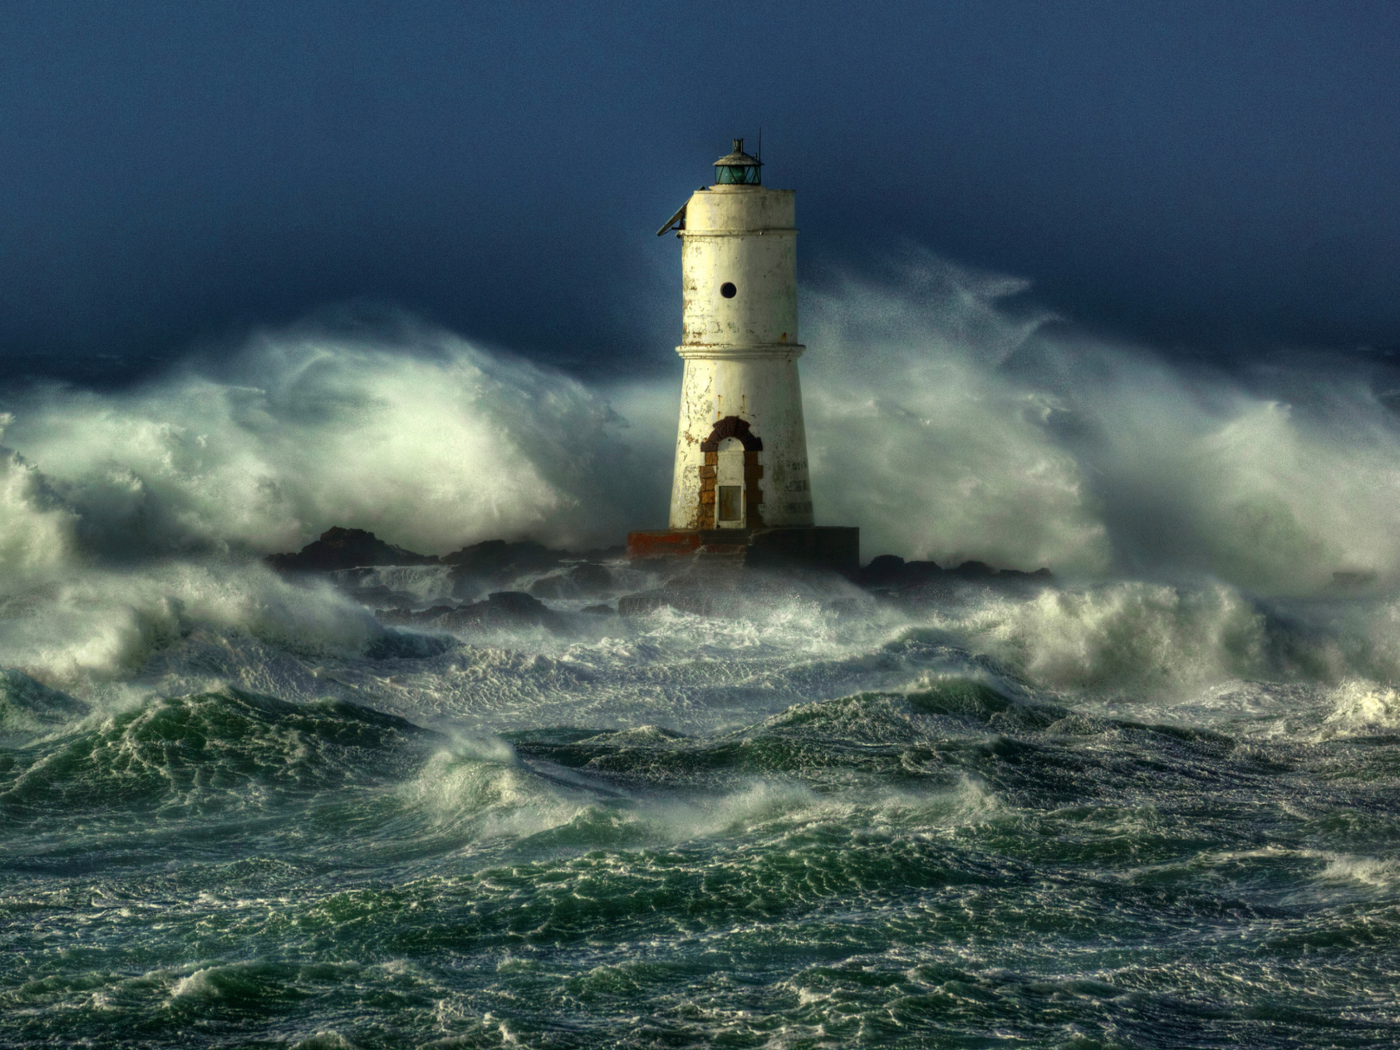 Ocean Storm And Lonely Lighthouse screenshot #1 1400x1050